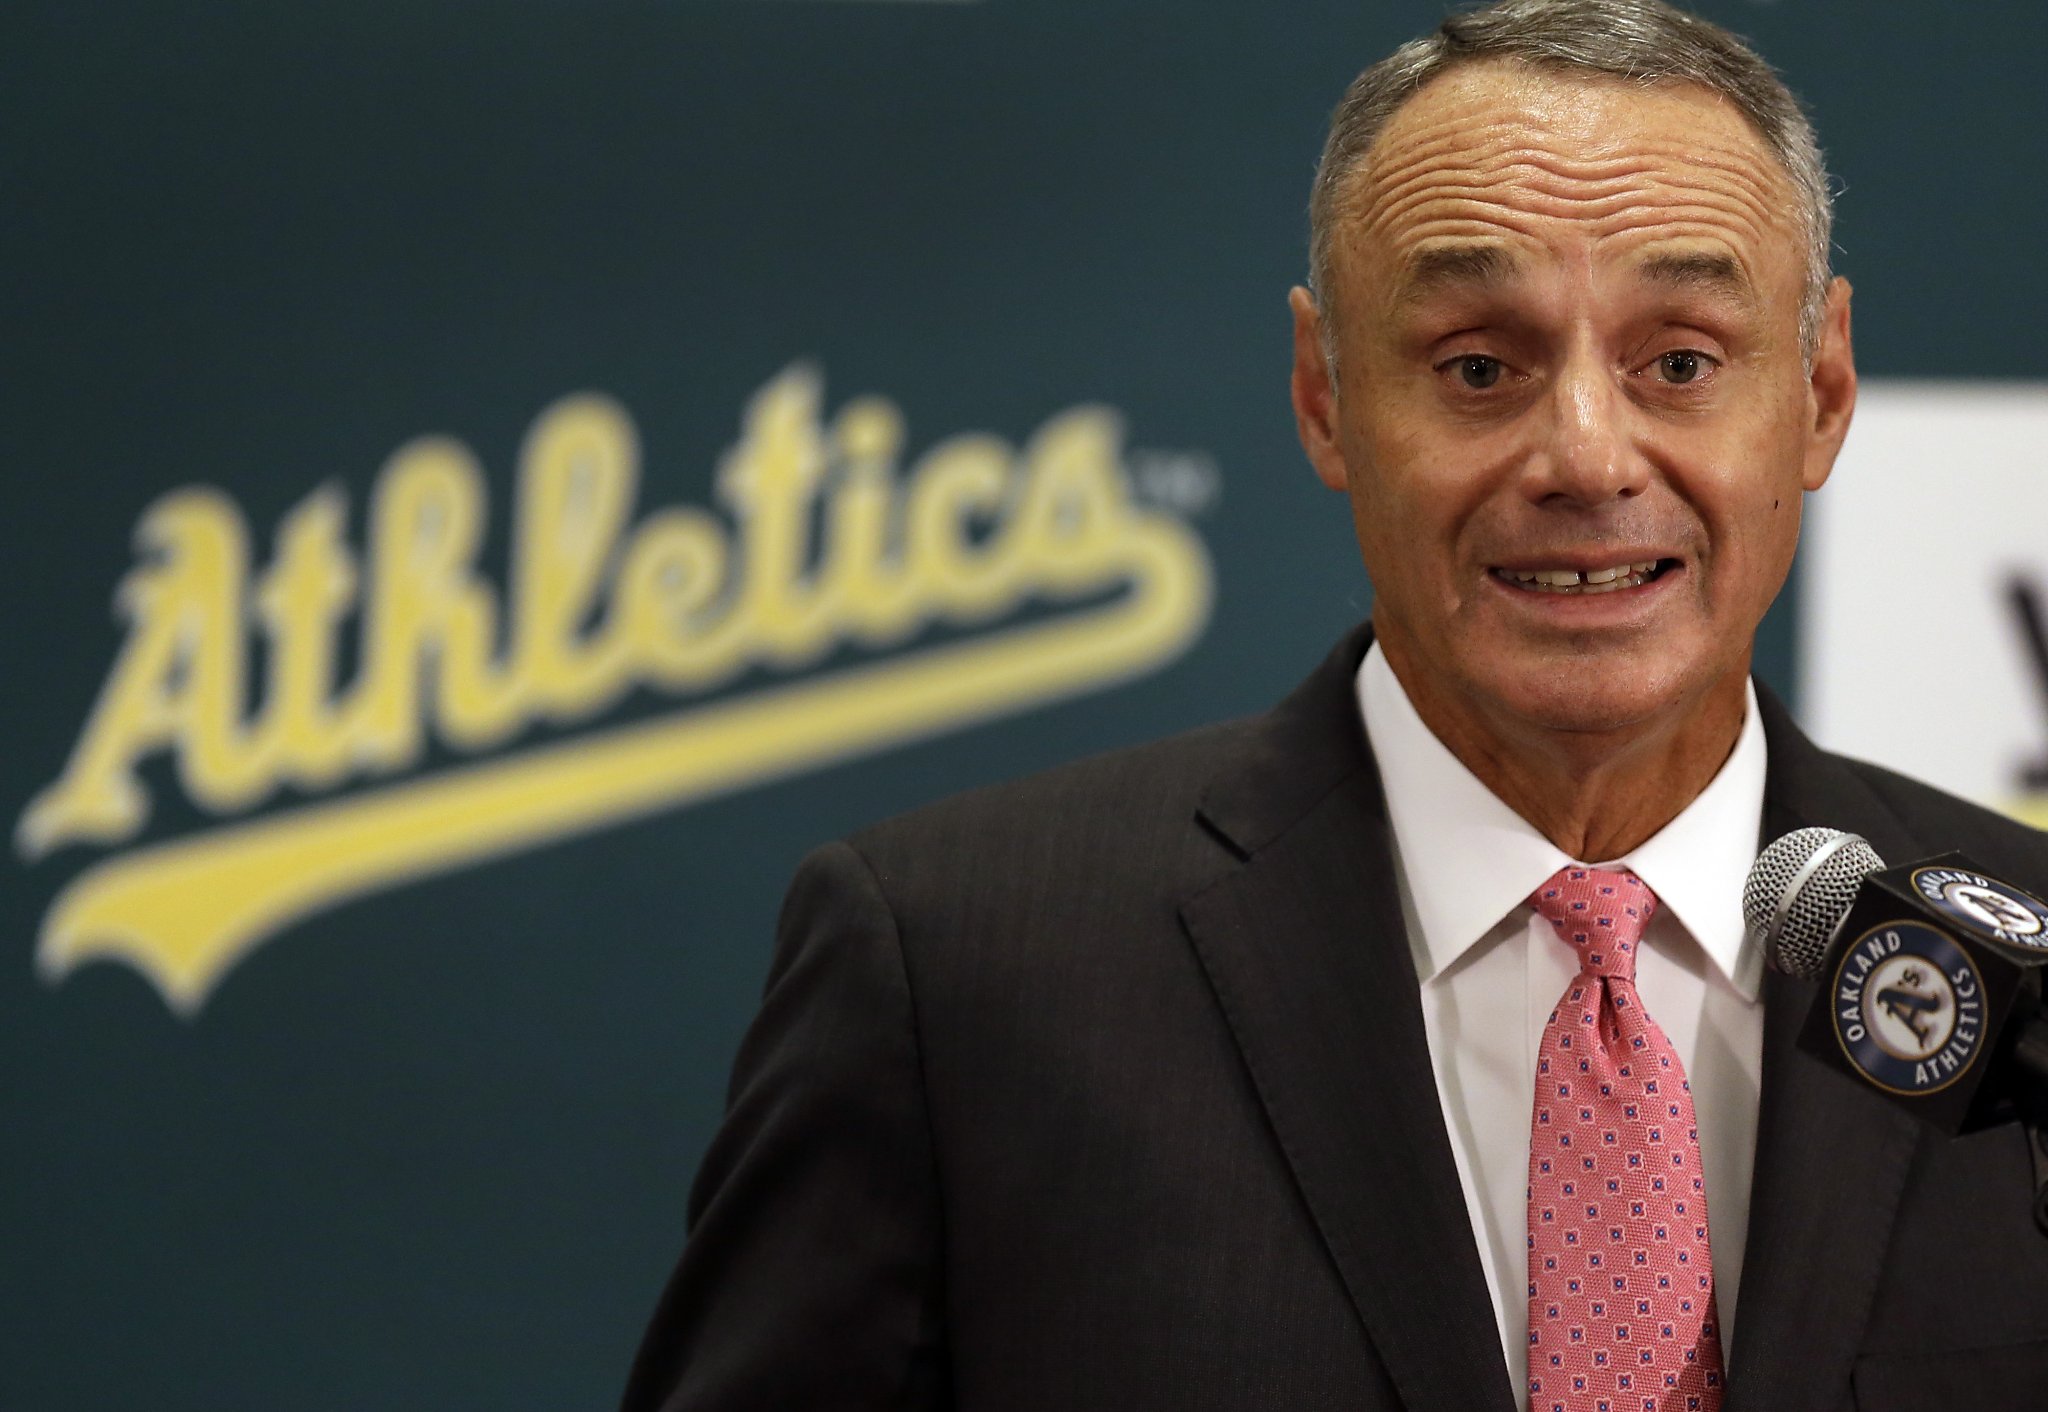 MLB Commissioner Manfred tackles A's stadium quandary